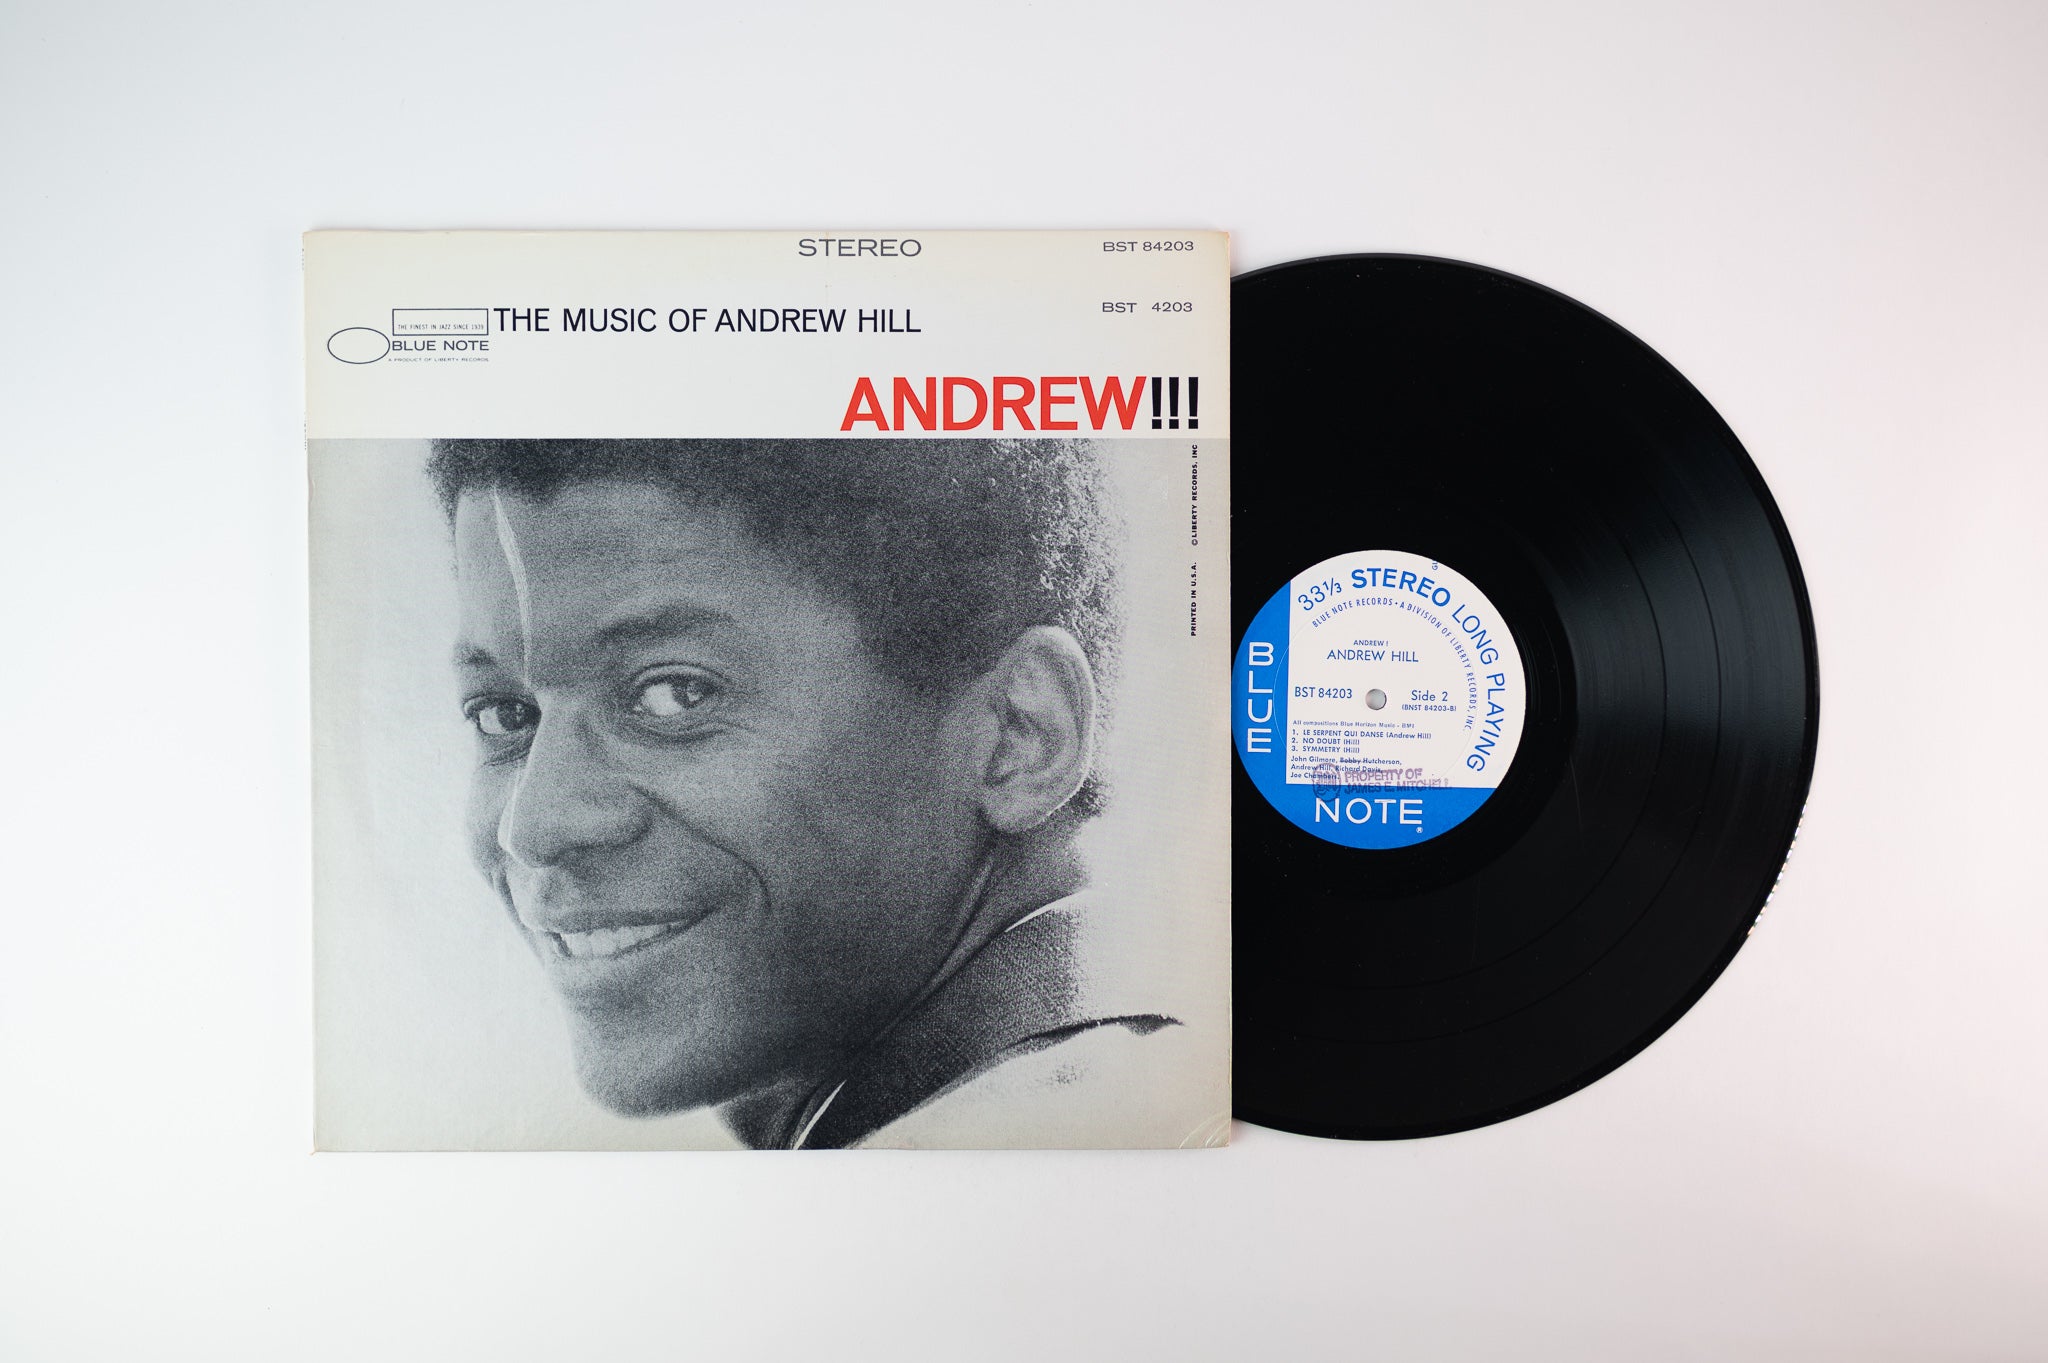 Andrew Hill - Andrew!!! on Blues Note Stereo Liberty